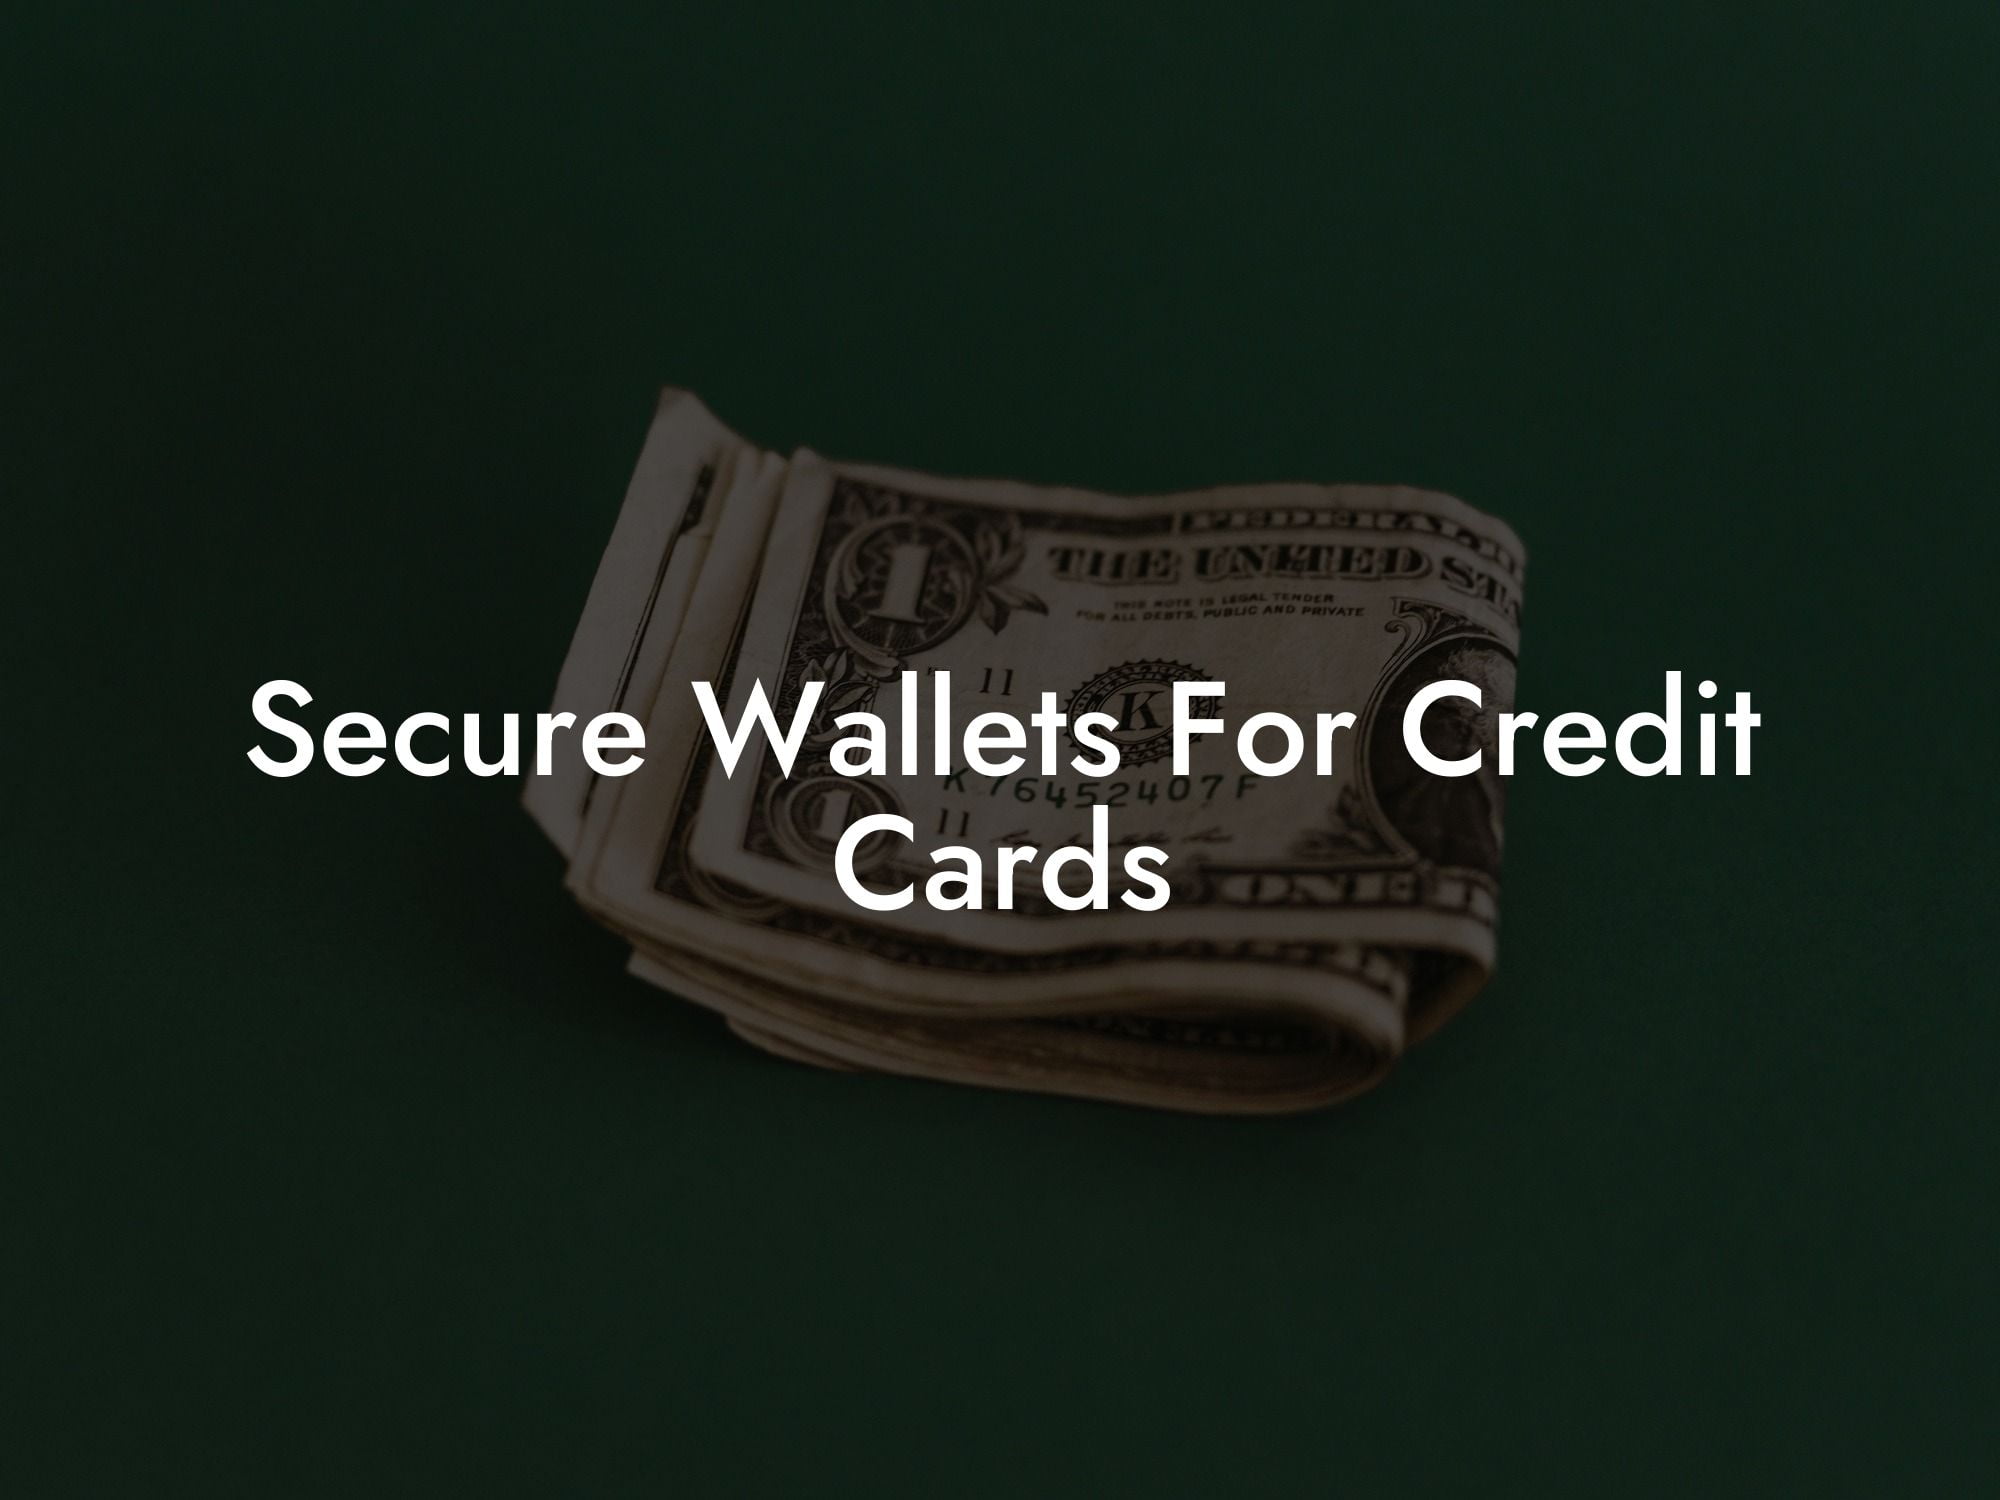 Secure Wallets For Credit Cards